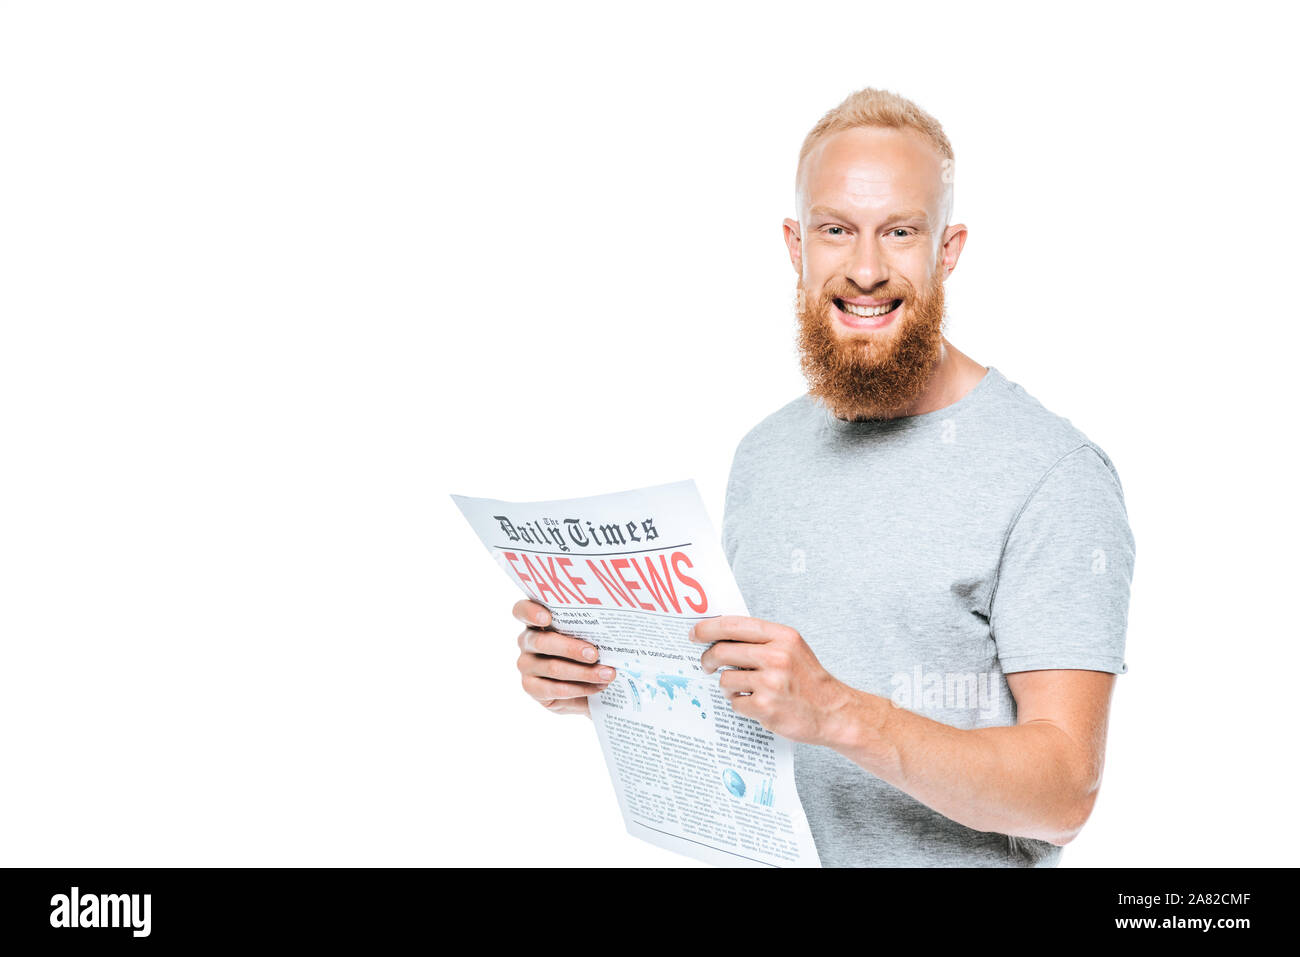 bearded smiling man reading newspaper with fake news, isolated on white Stock Photo